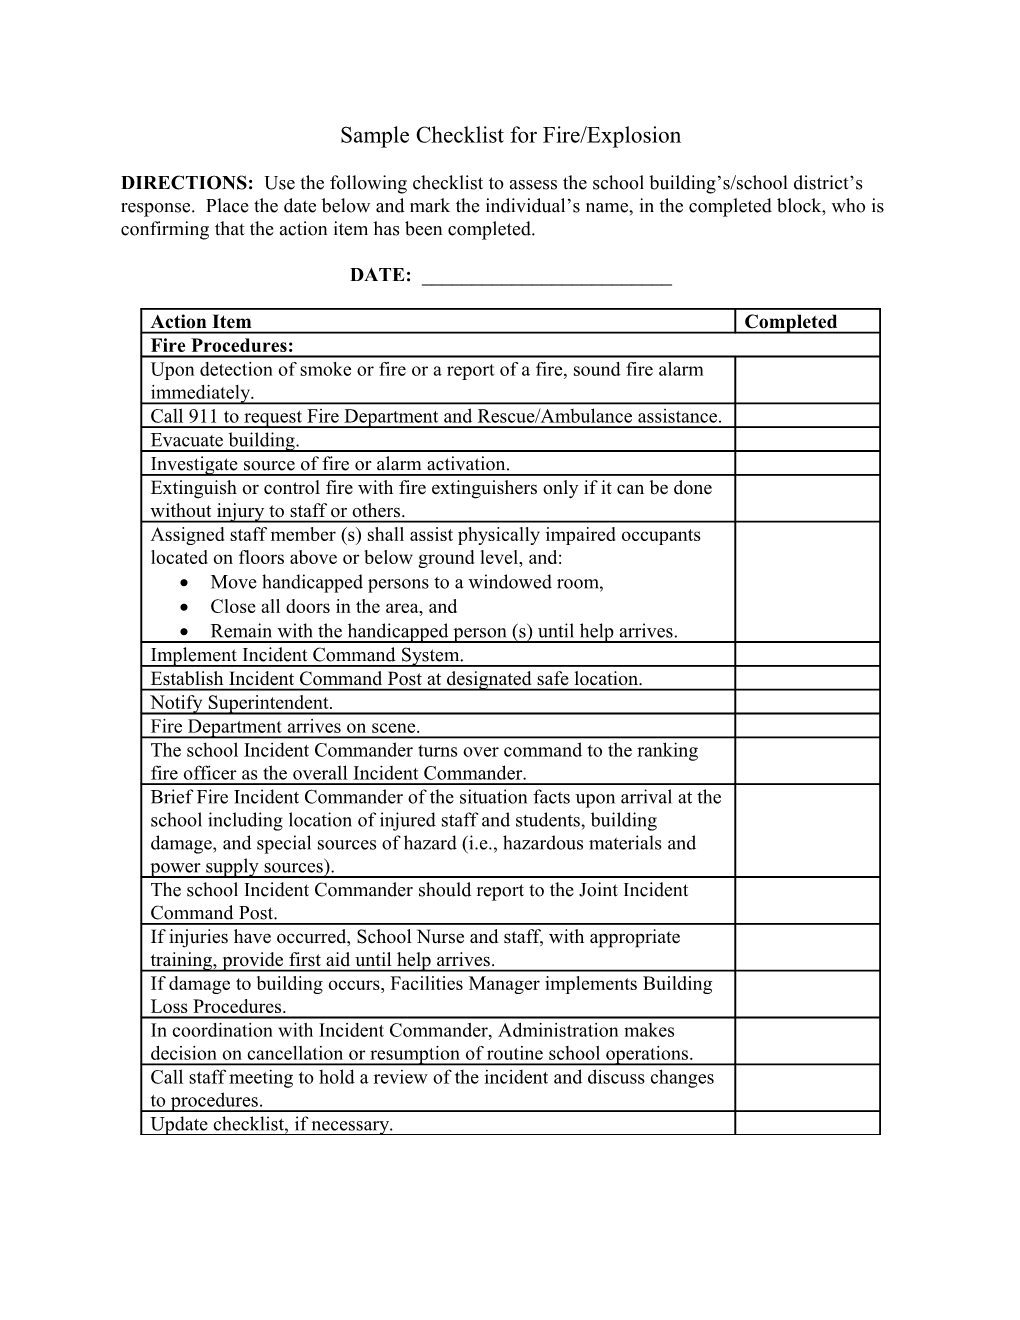 Sample Checklist for Fire/Explosion